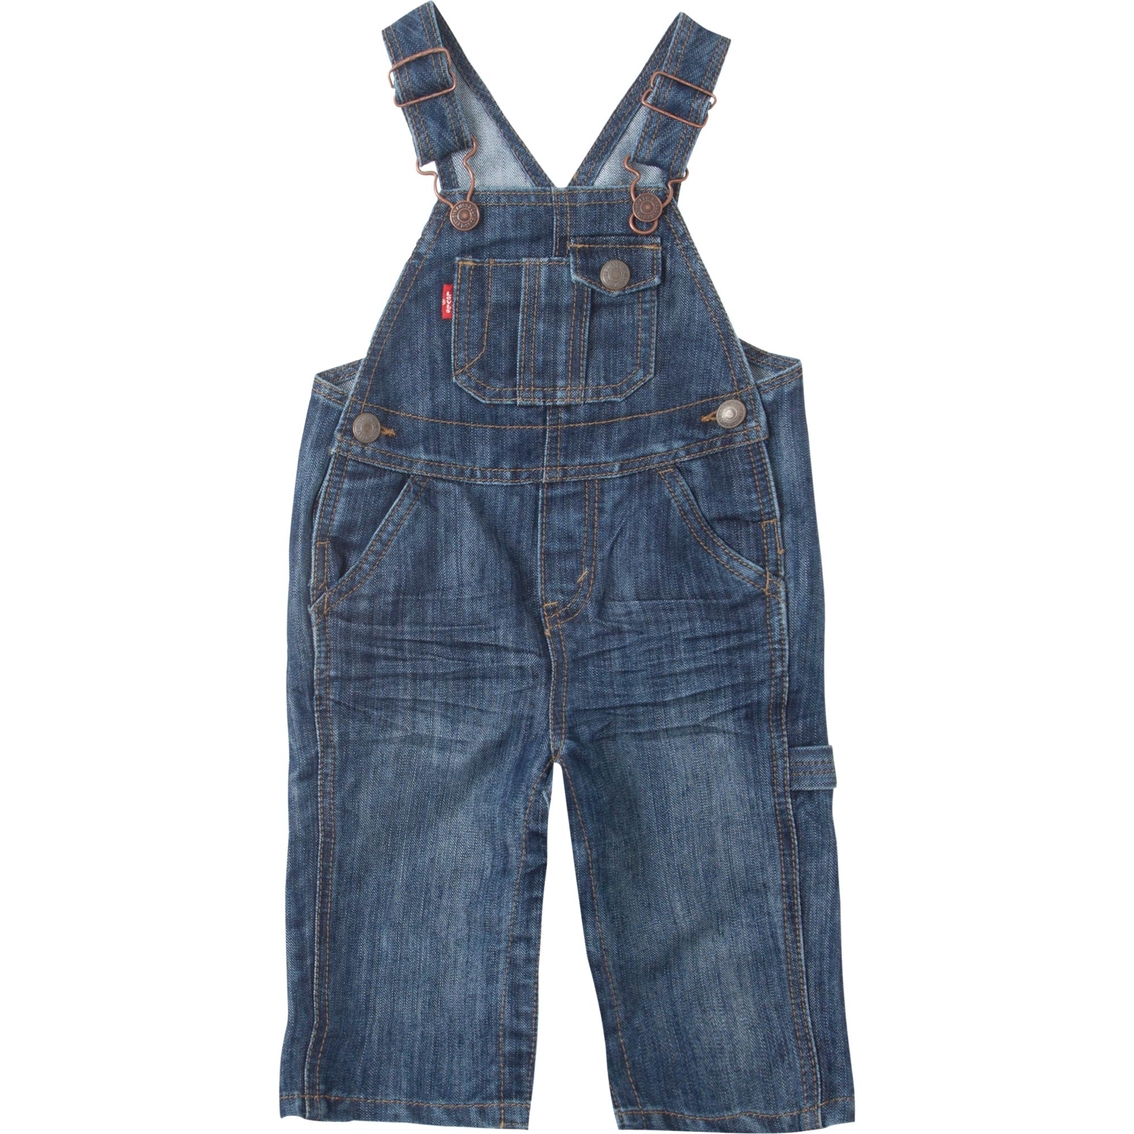 Levis Overalls Size Chart